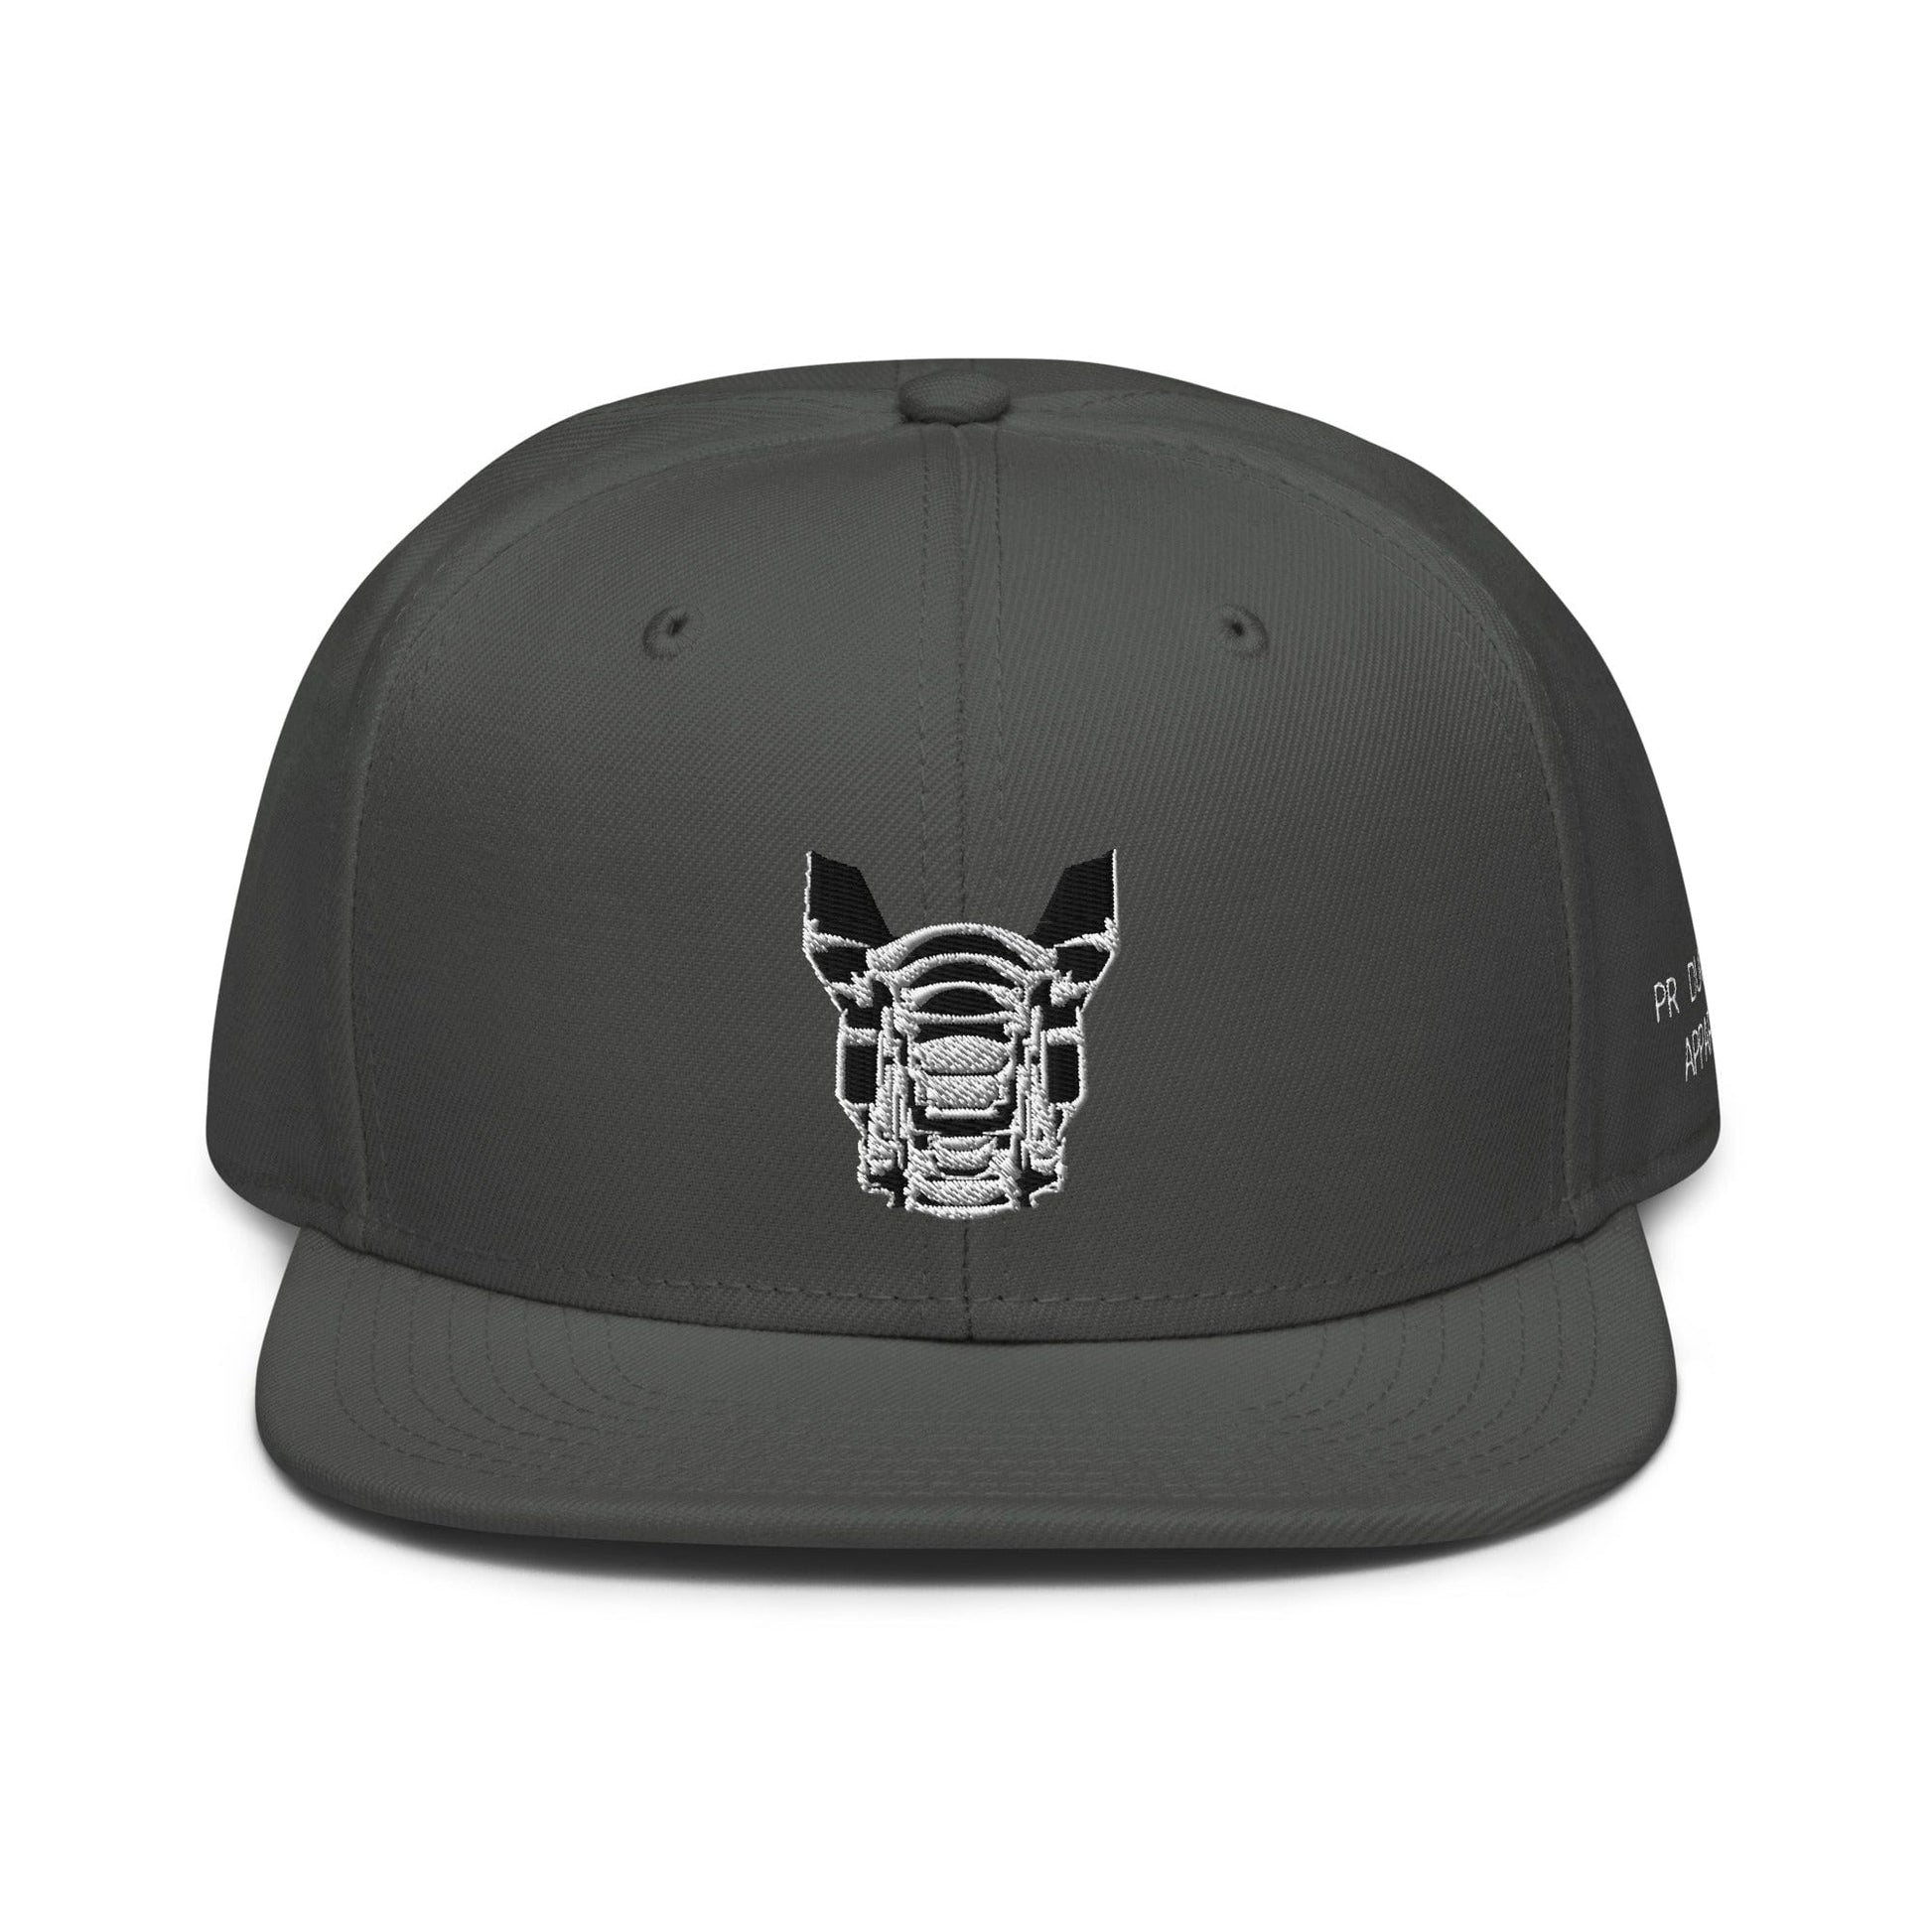 Production Apparel Lens Cross Section Hat Charcoal gray